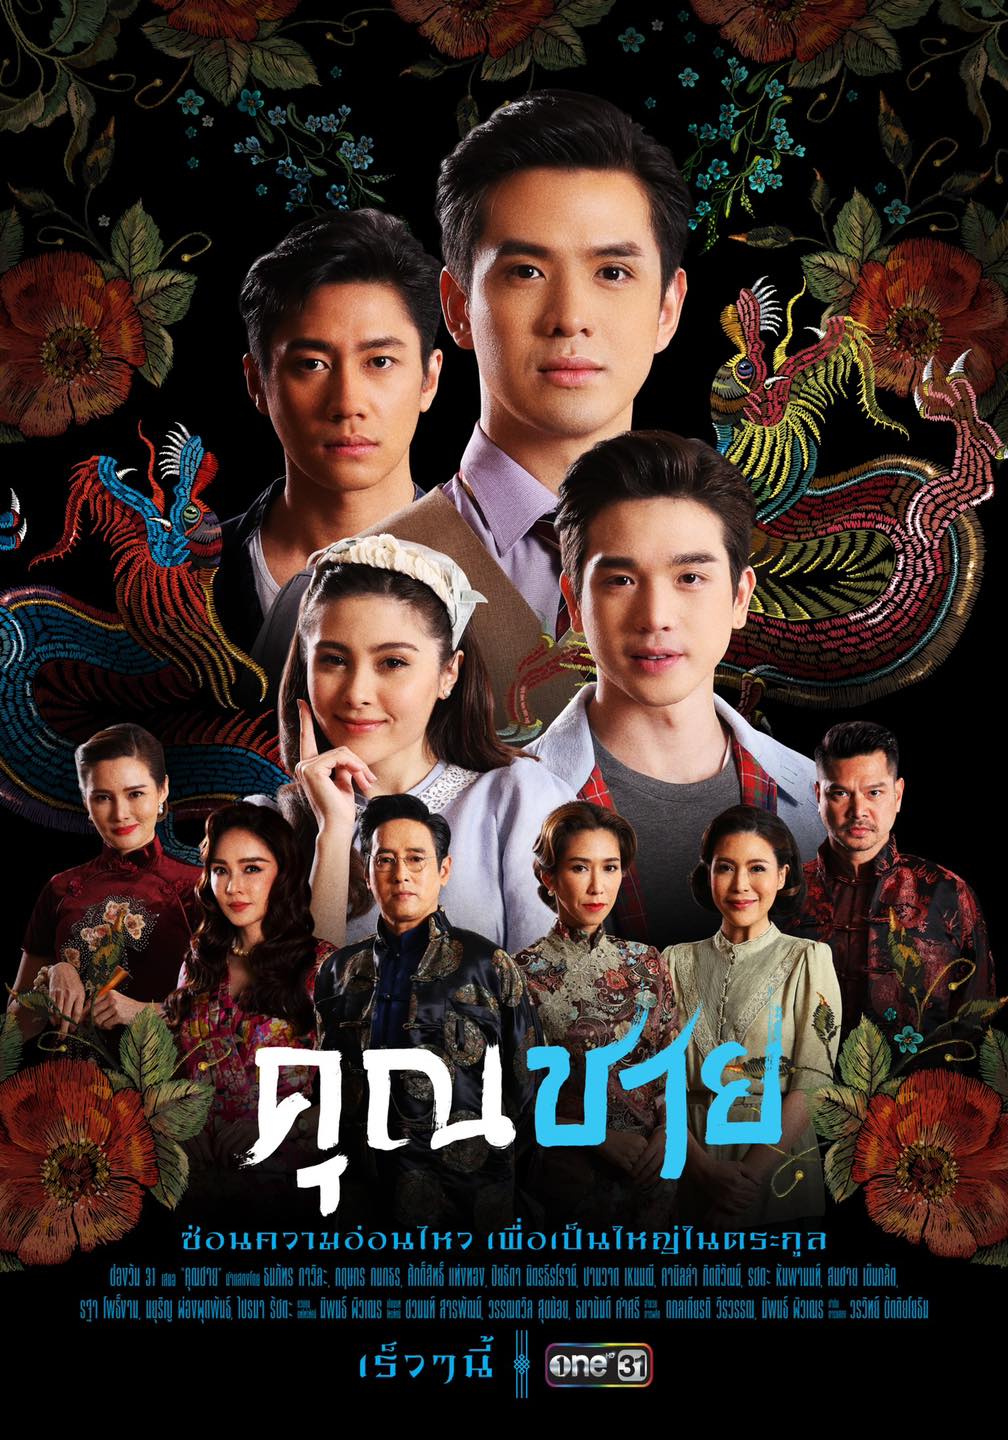 TV ratings for To Sir, With Love (คุณชาย) in Tailandia. One31 TV series